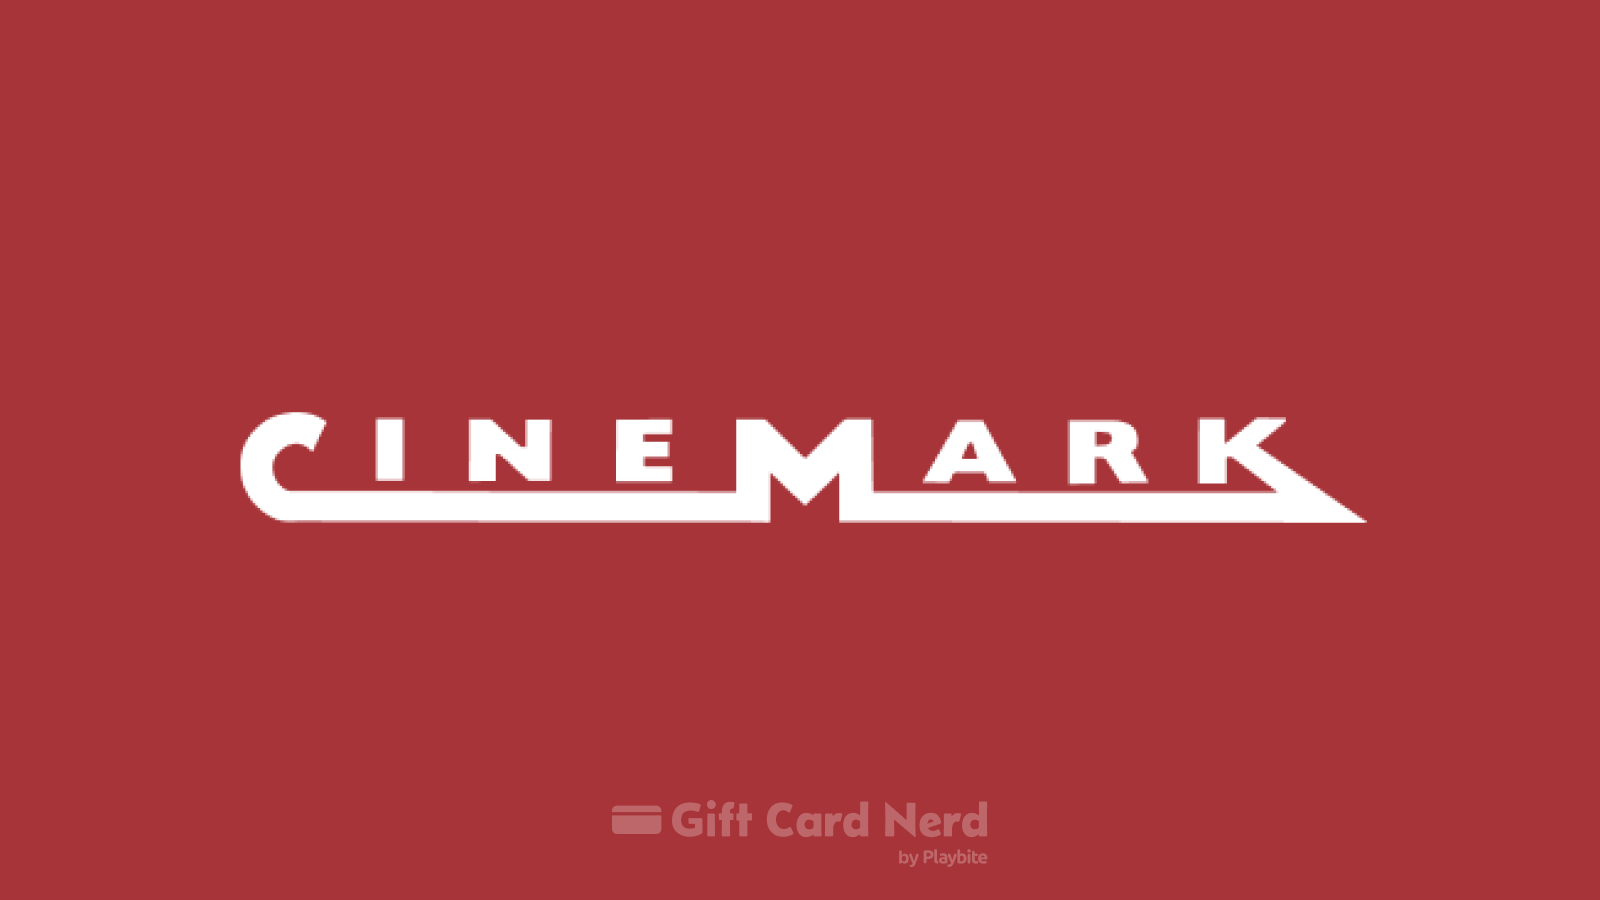 Can I Use a Cinemark Gift Card on Roblox?